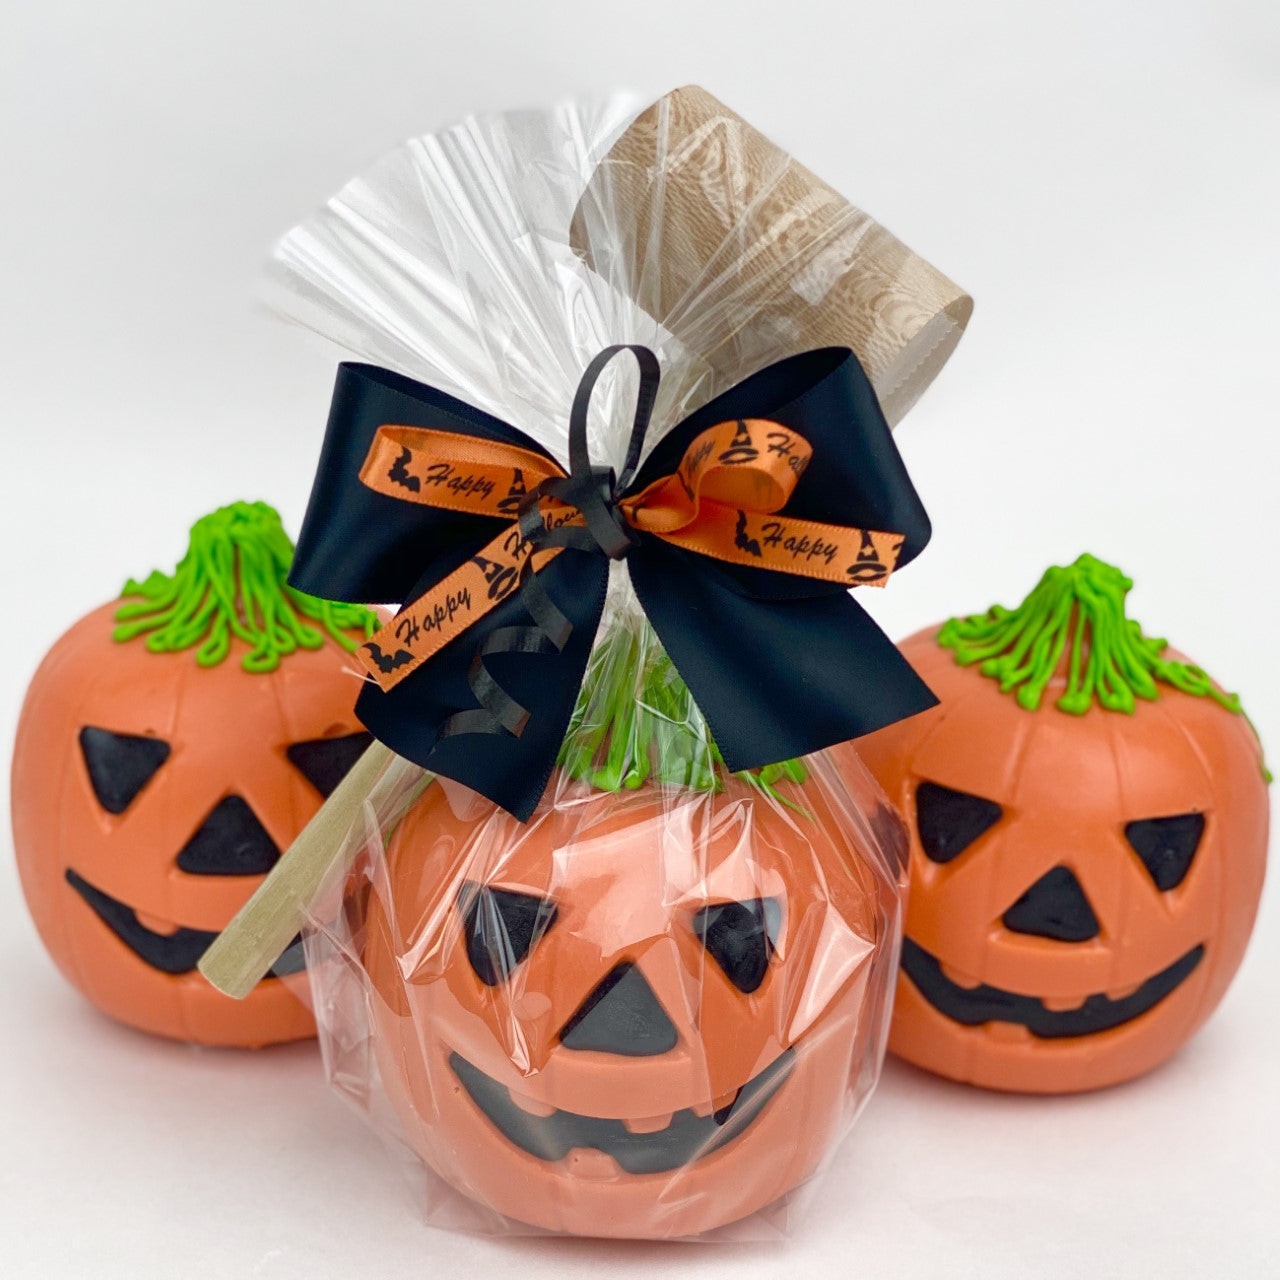 Halloween Jack-O-Lantern Piñatas, one with a mallet wrapped in cellophane with ribbons